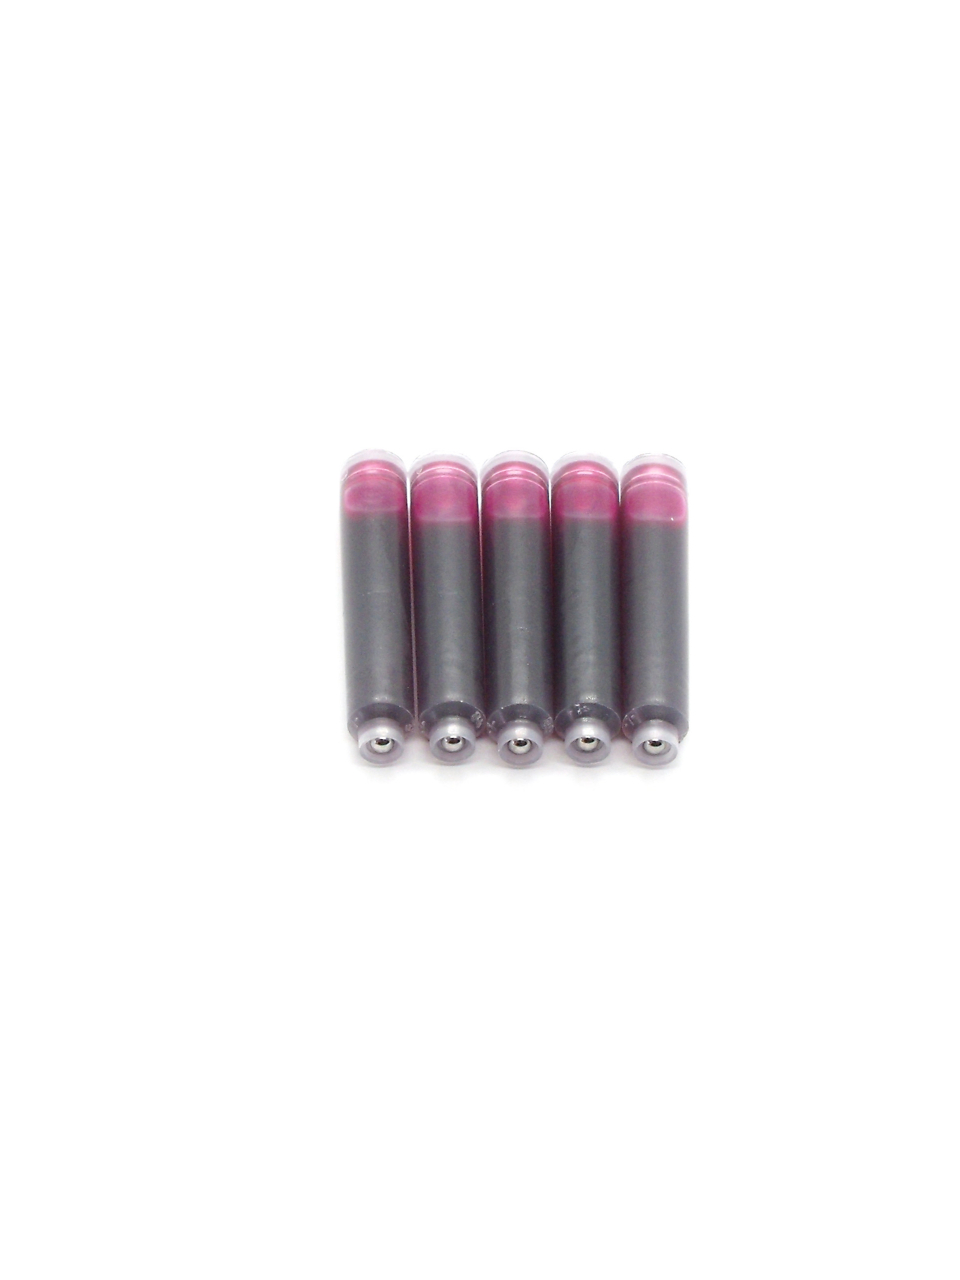 Top Ink Cartridges For International Fountain Pens (Pink)